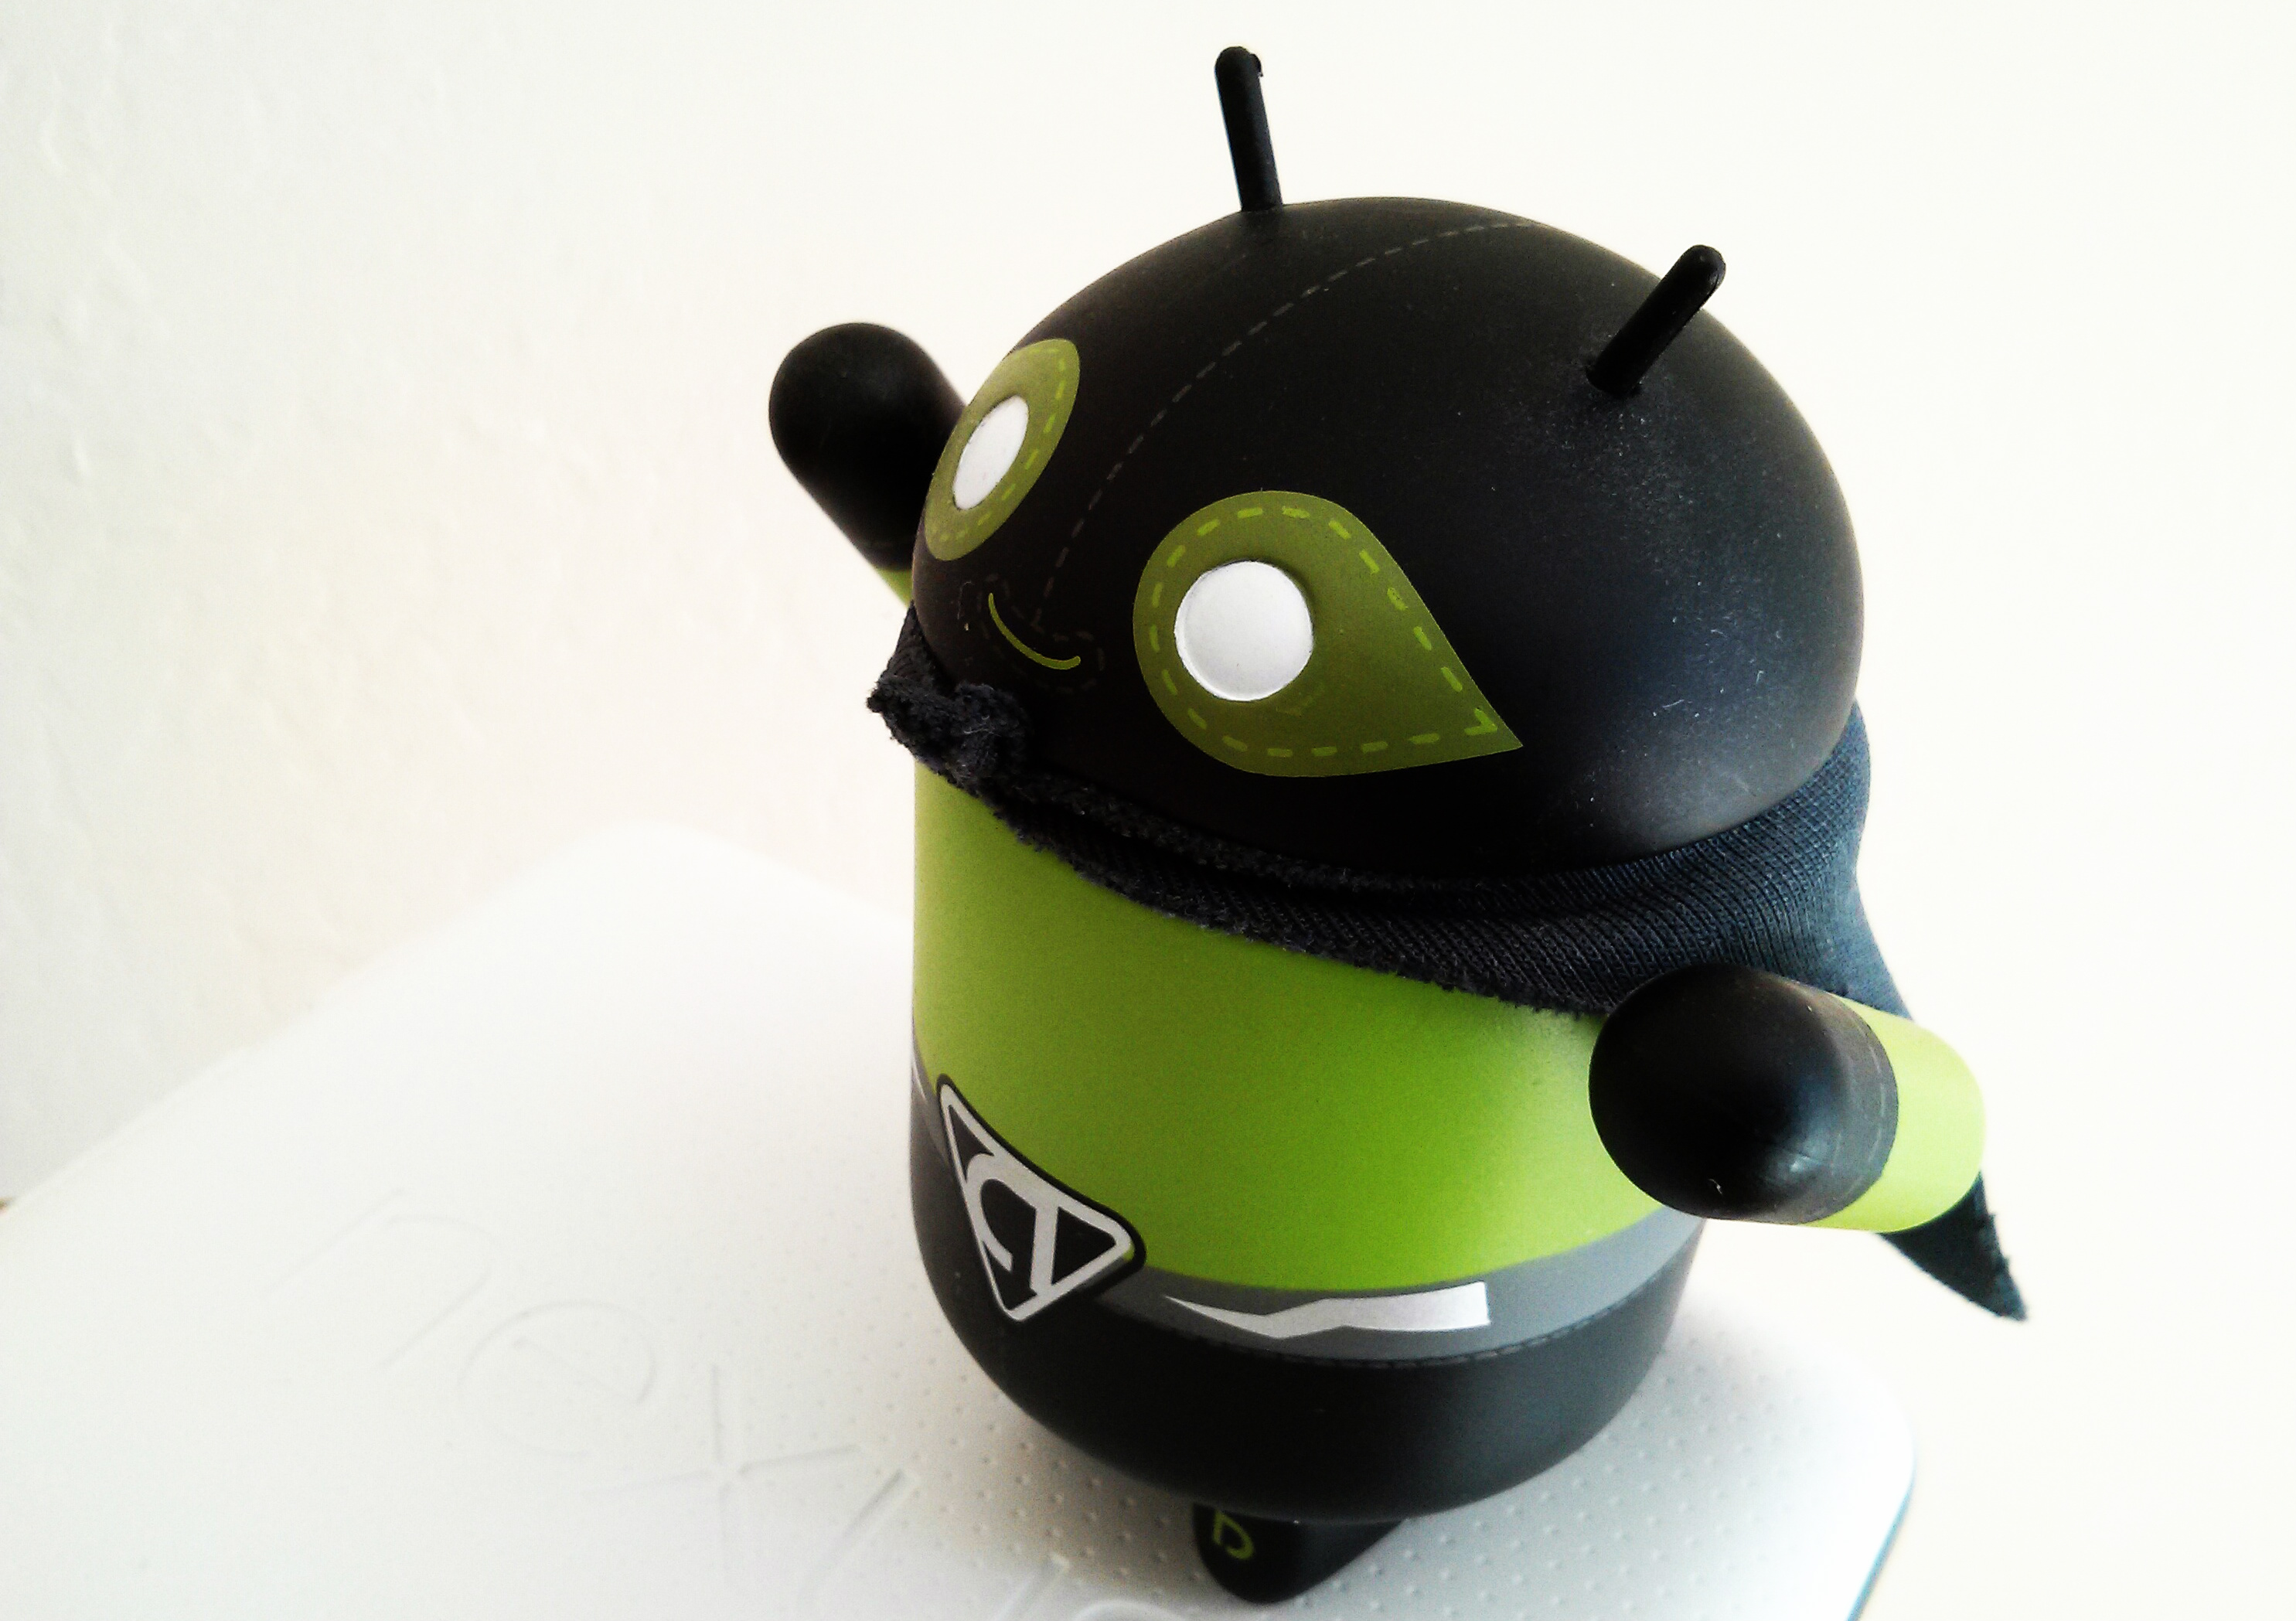 Jelly Bean surges past 50 percent Android market share